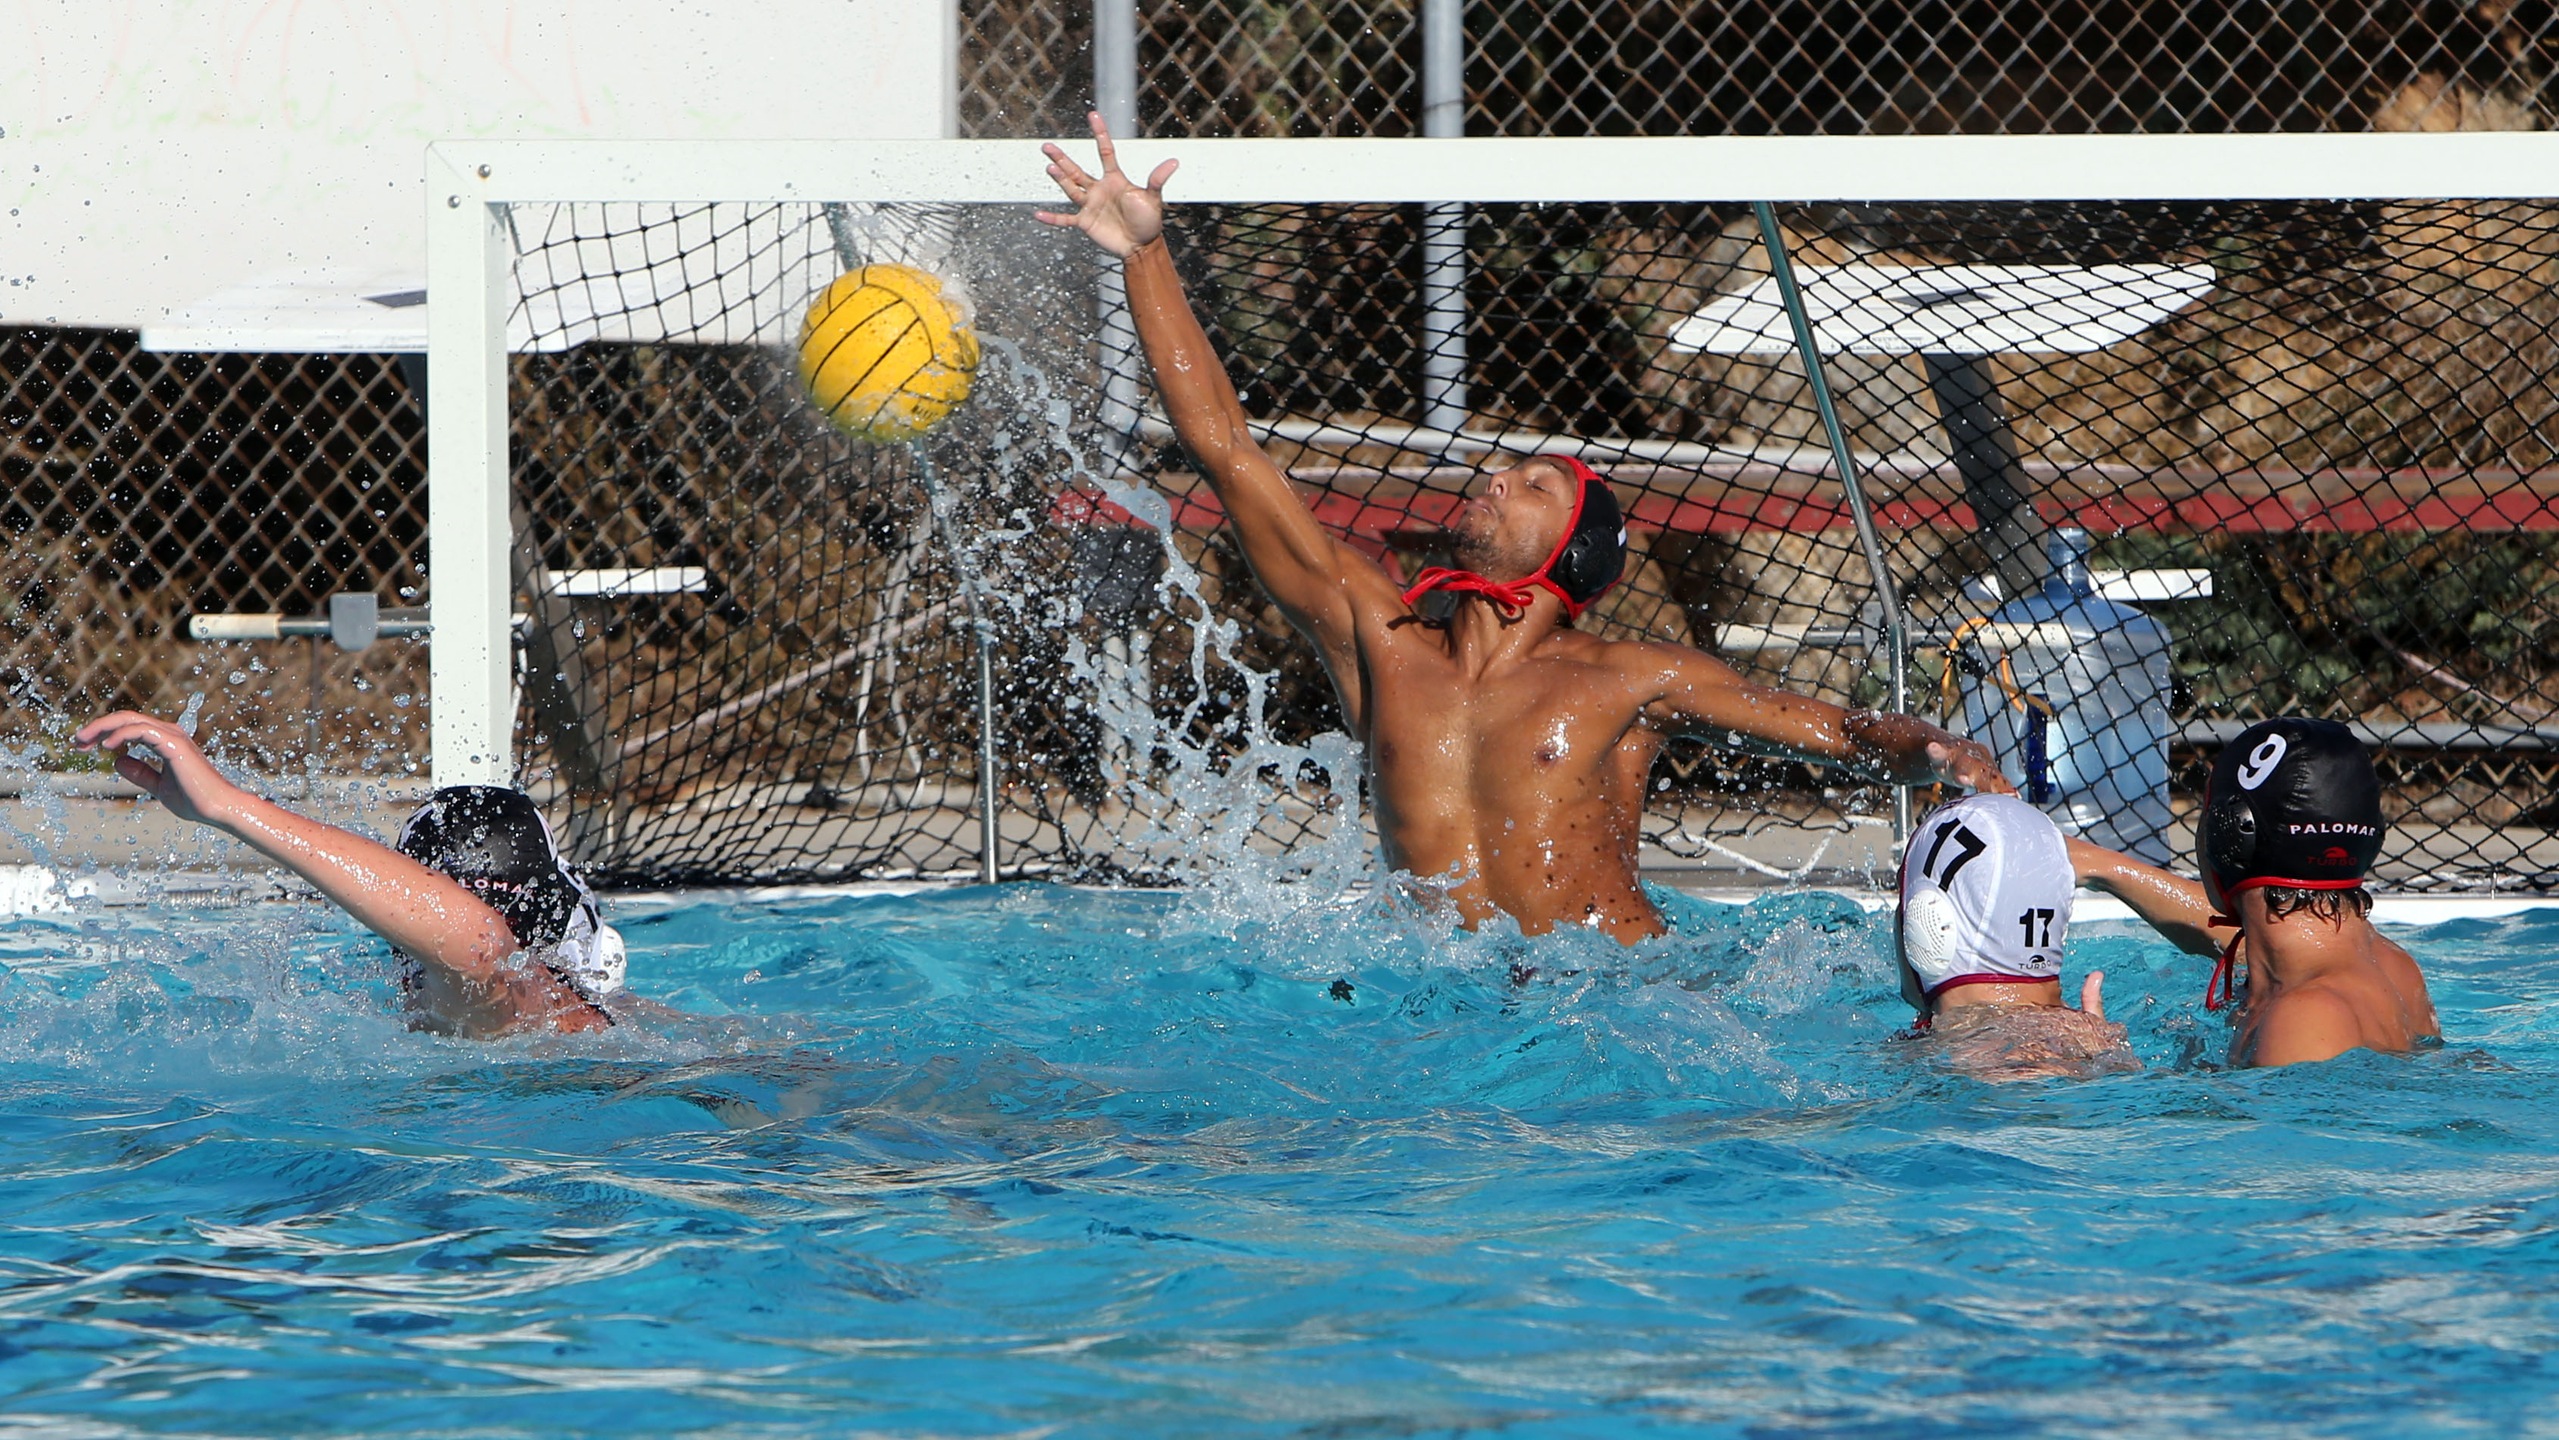 David Oceguera had 13 saves on the day. Photo by Hugh Cox.